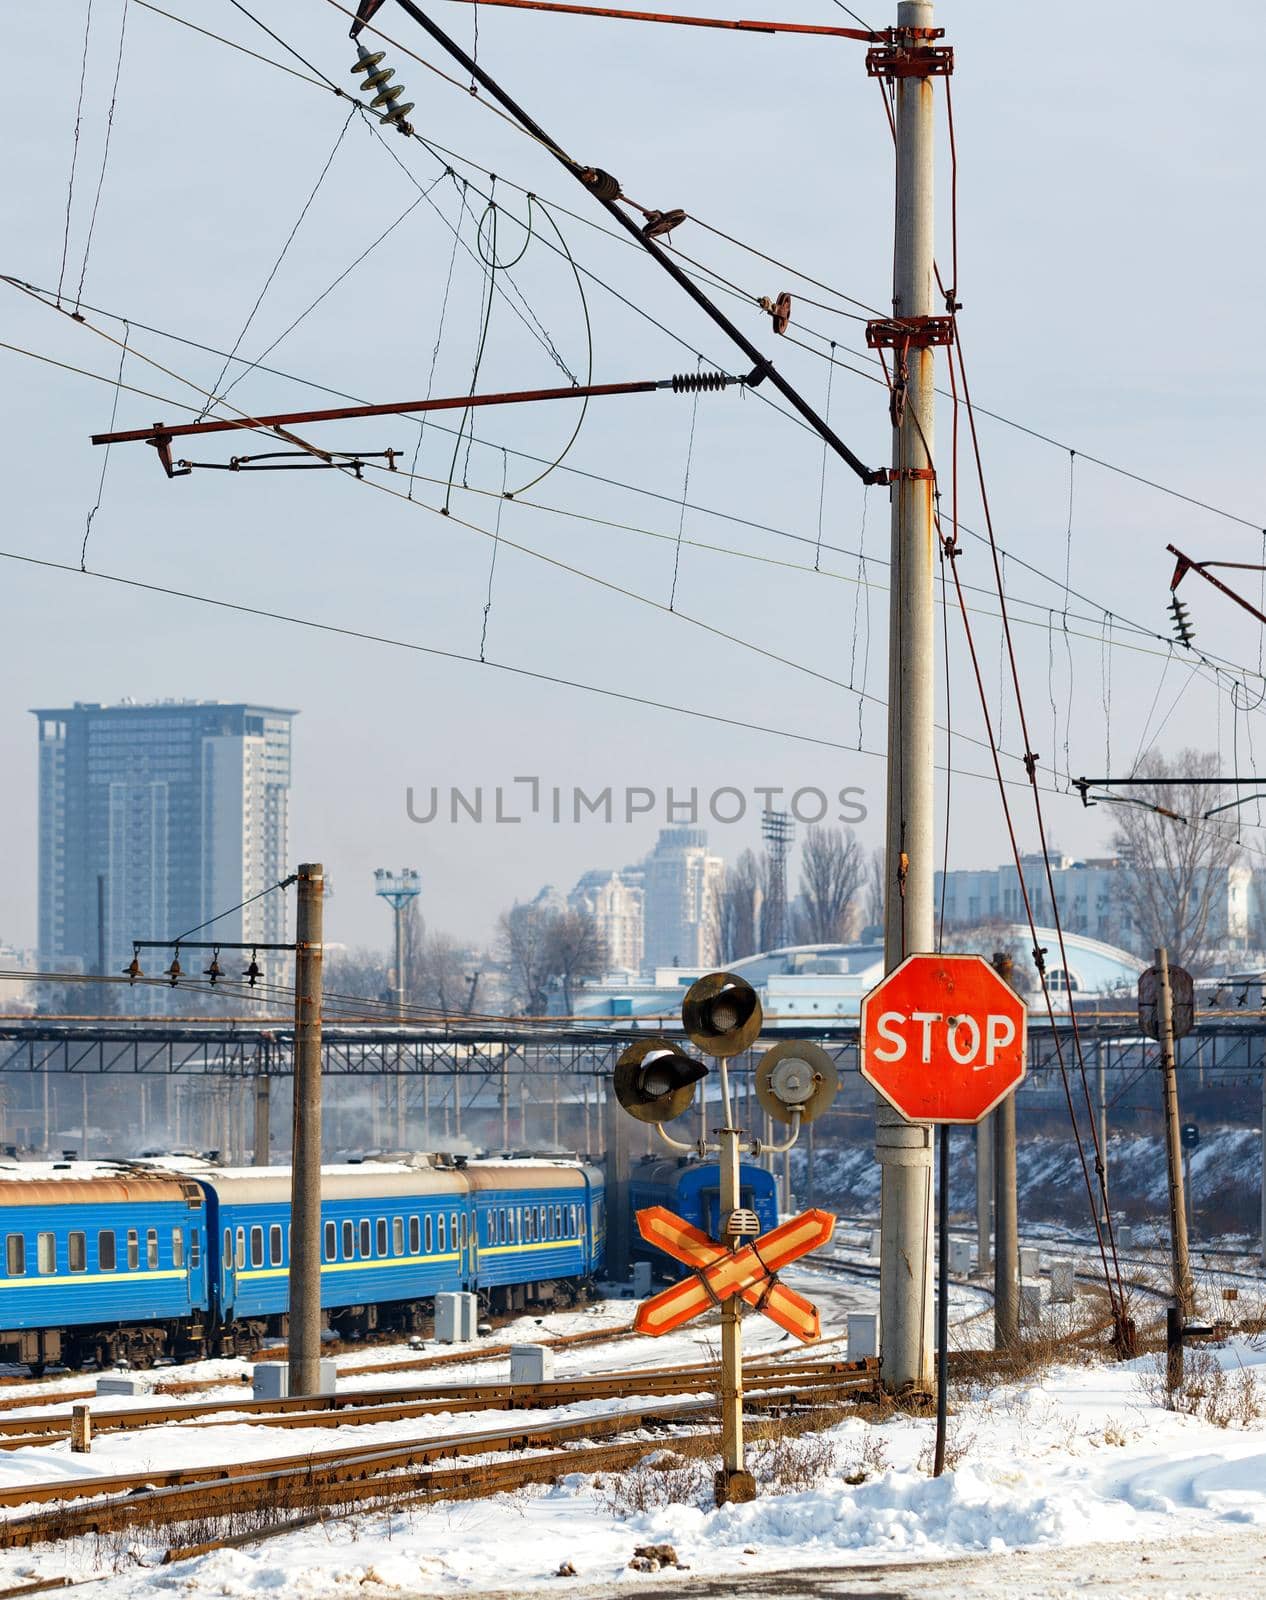 Red stop sign at a railway crossing against the background of railway tracks, blue train carriages and cityscape at the entrance to the city, winter cityscape, vertical image.